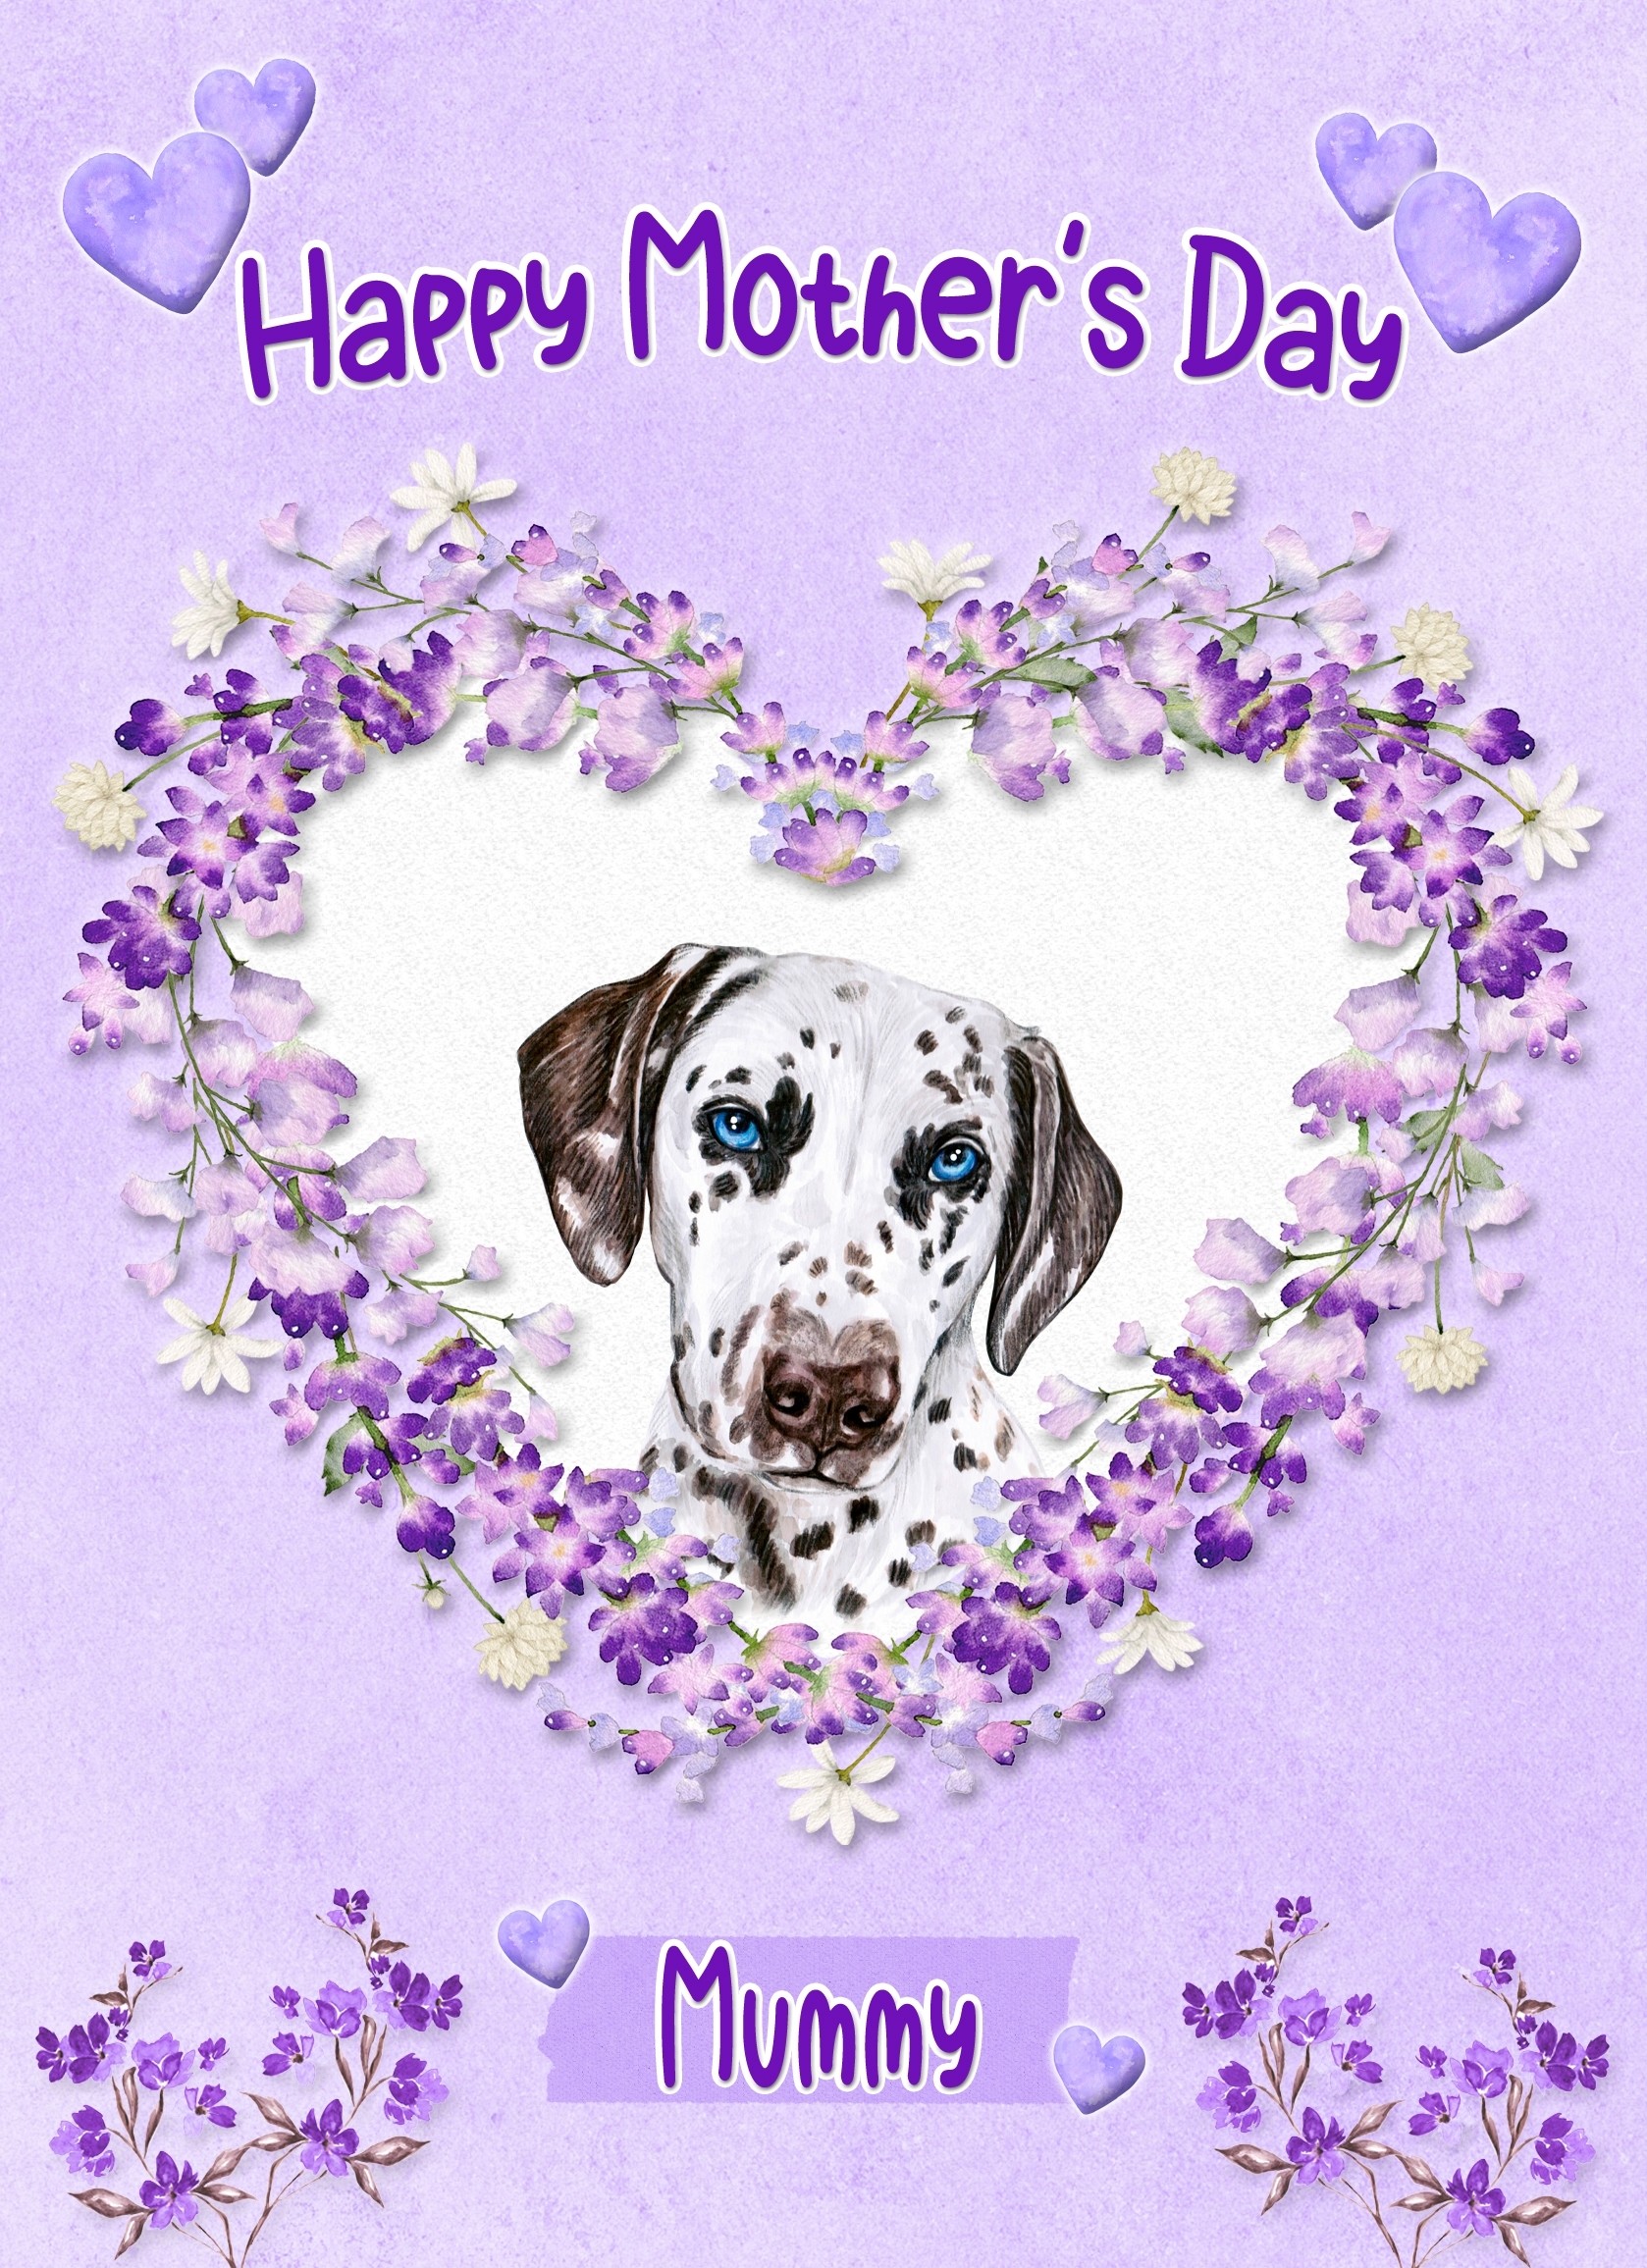 Dalmatian Dog Mothers Day Card (Happy Mothers, Mummy)